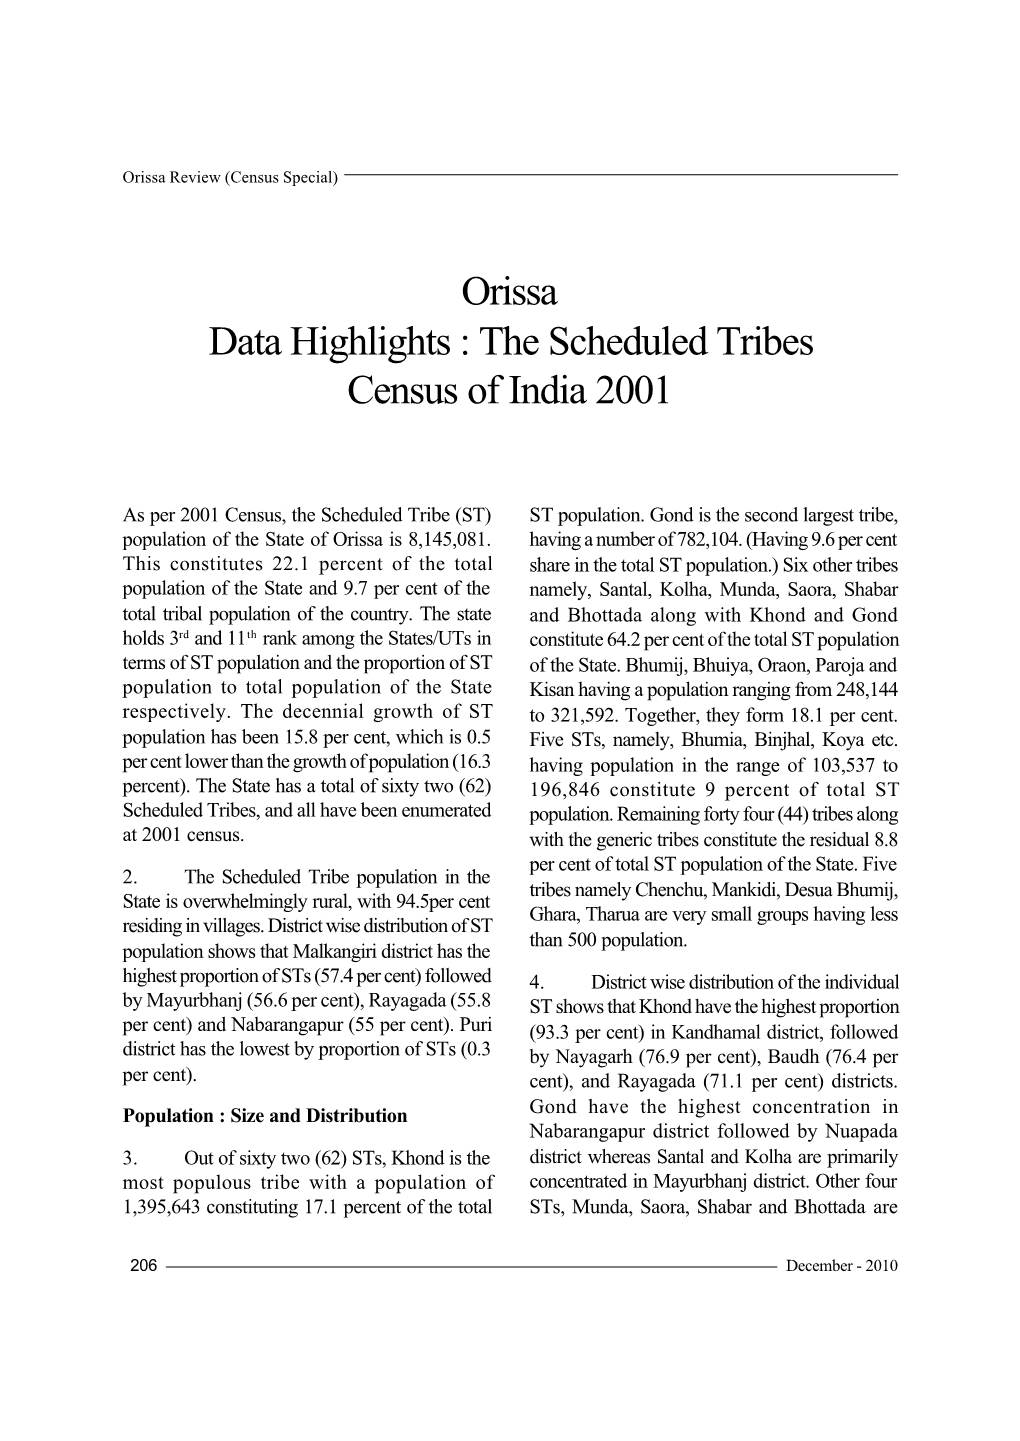 Orissa Data Highlights : the Scheduled Tribes Census of India 2001